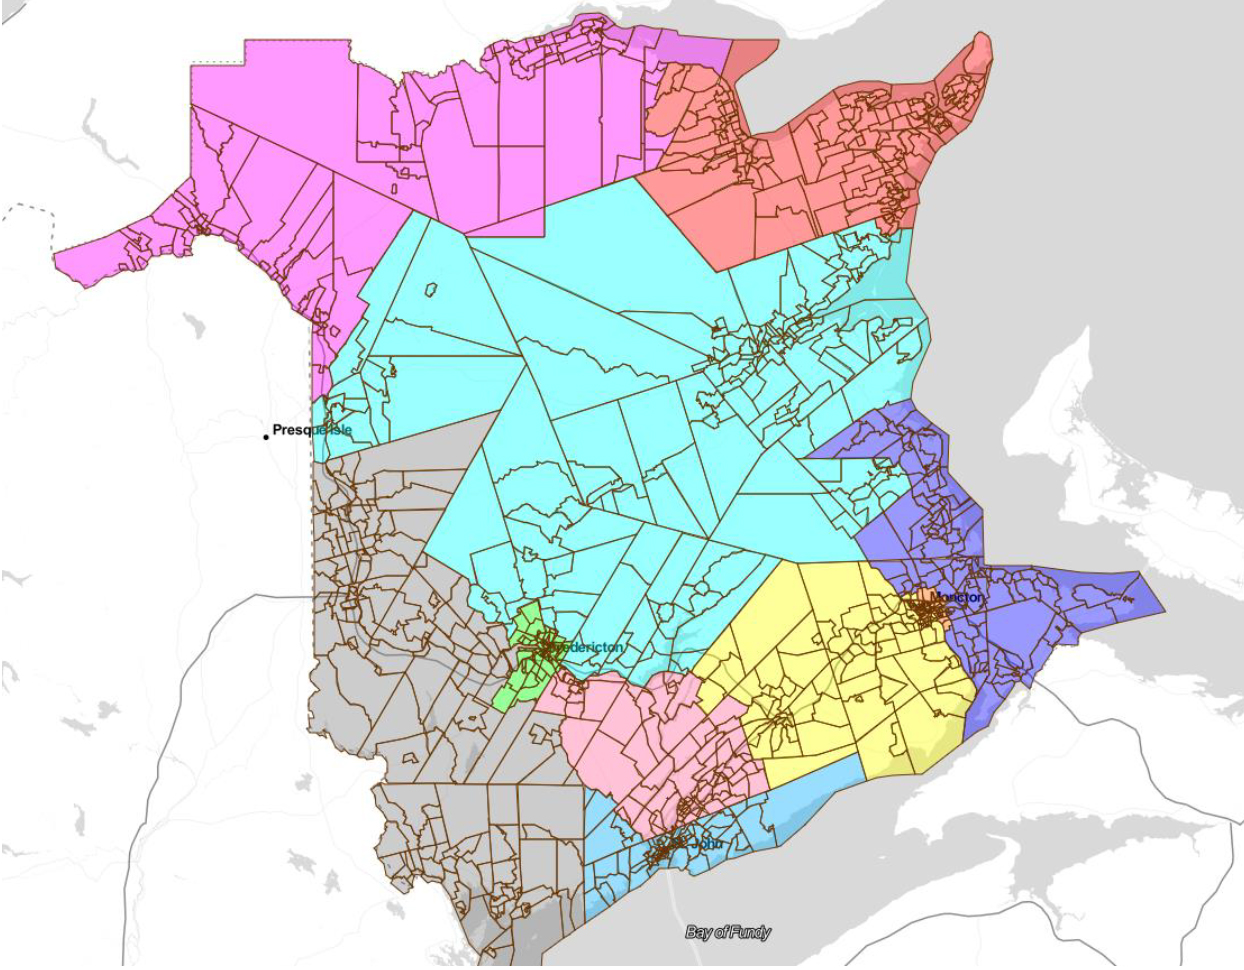 This image shows a proposed map of New Brunswick's electoral districts.